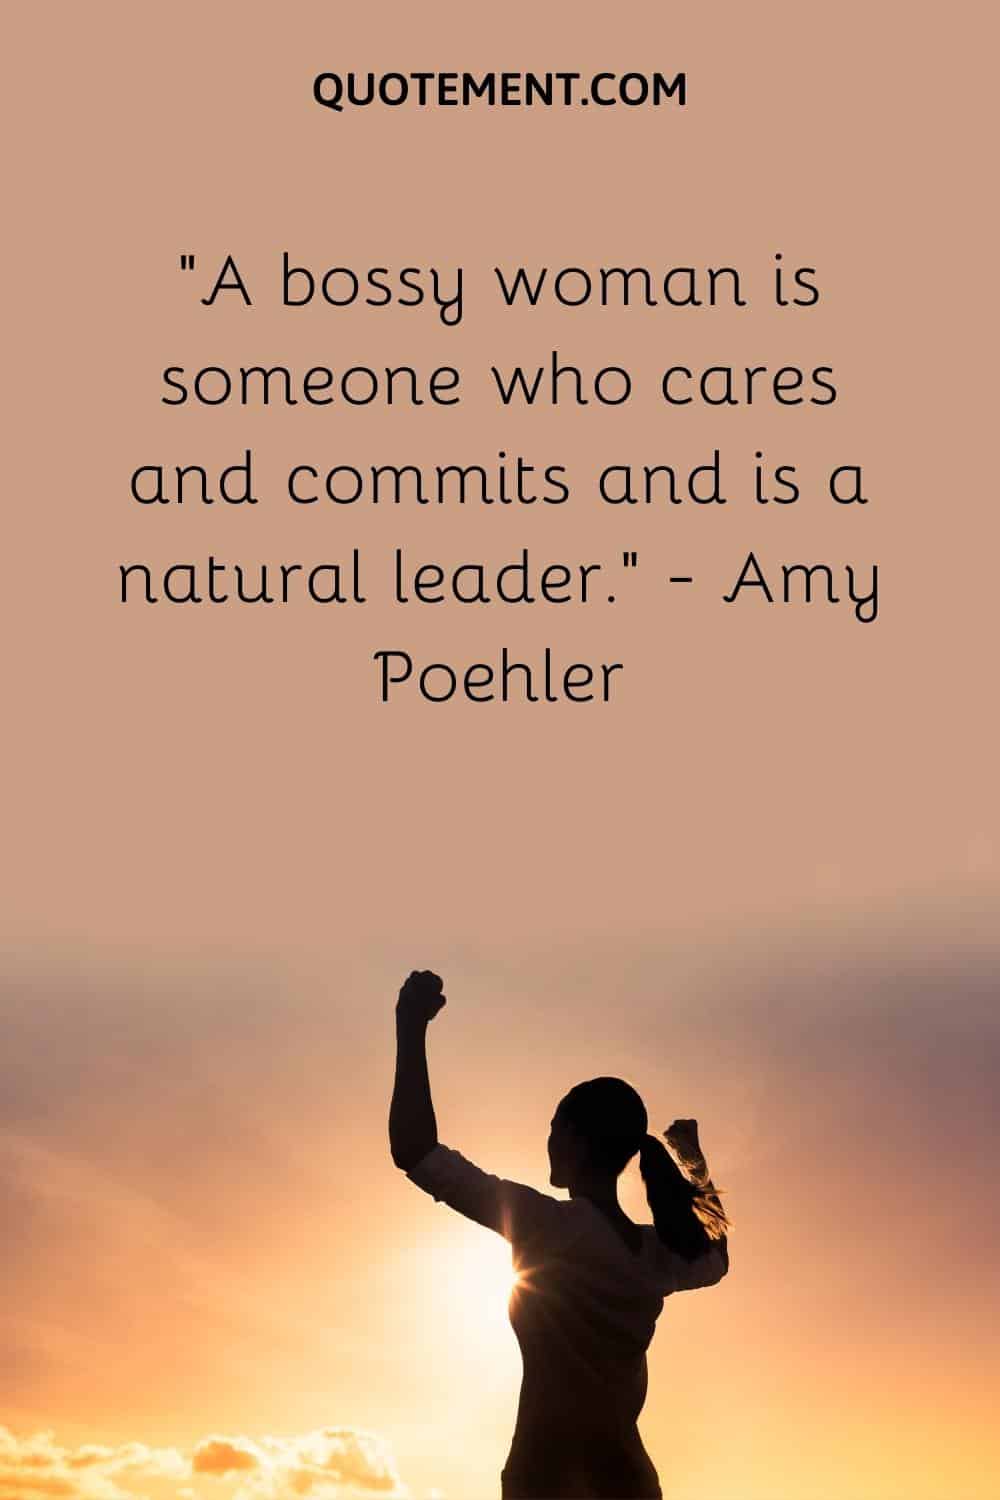 A bossy woman is someone who cares and commits and is a natural leader